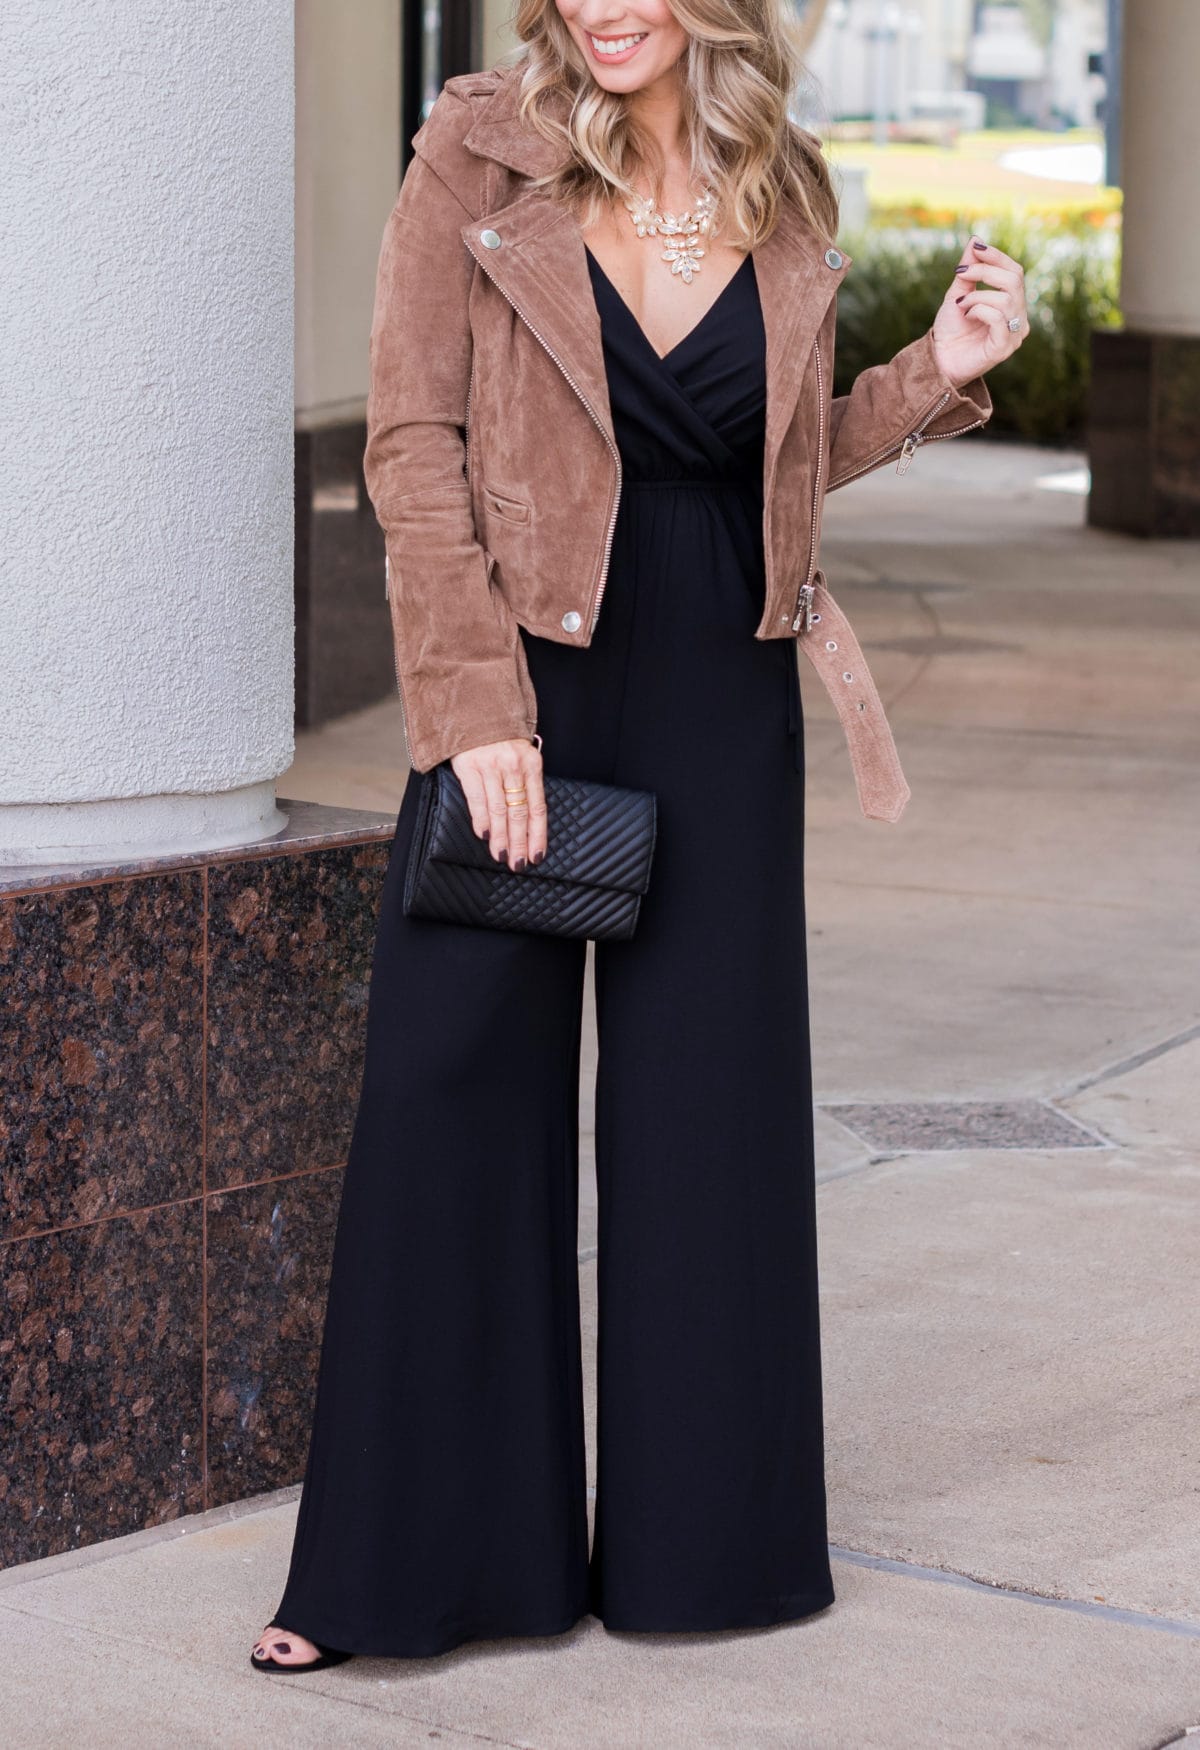 What to wear over a jumpsuit | NADINE MERABI